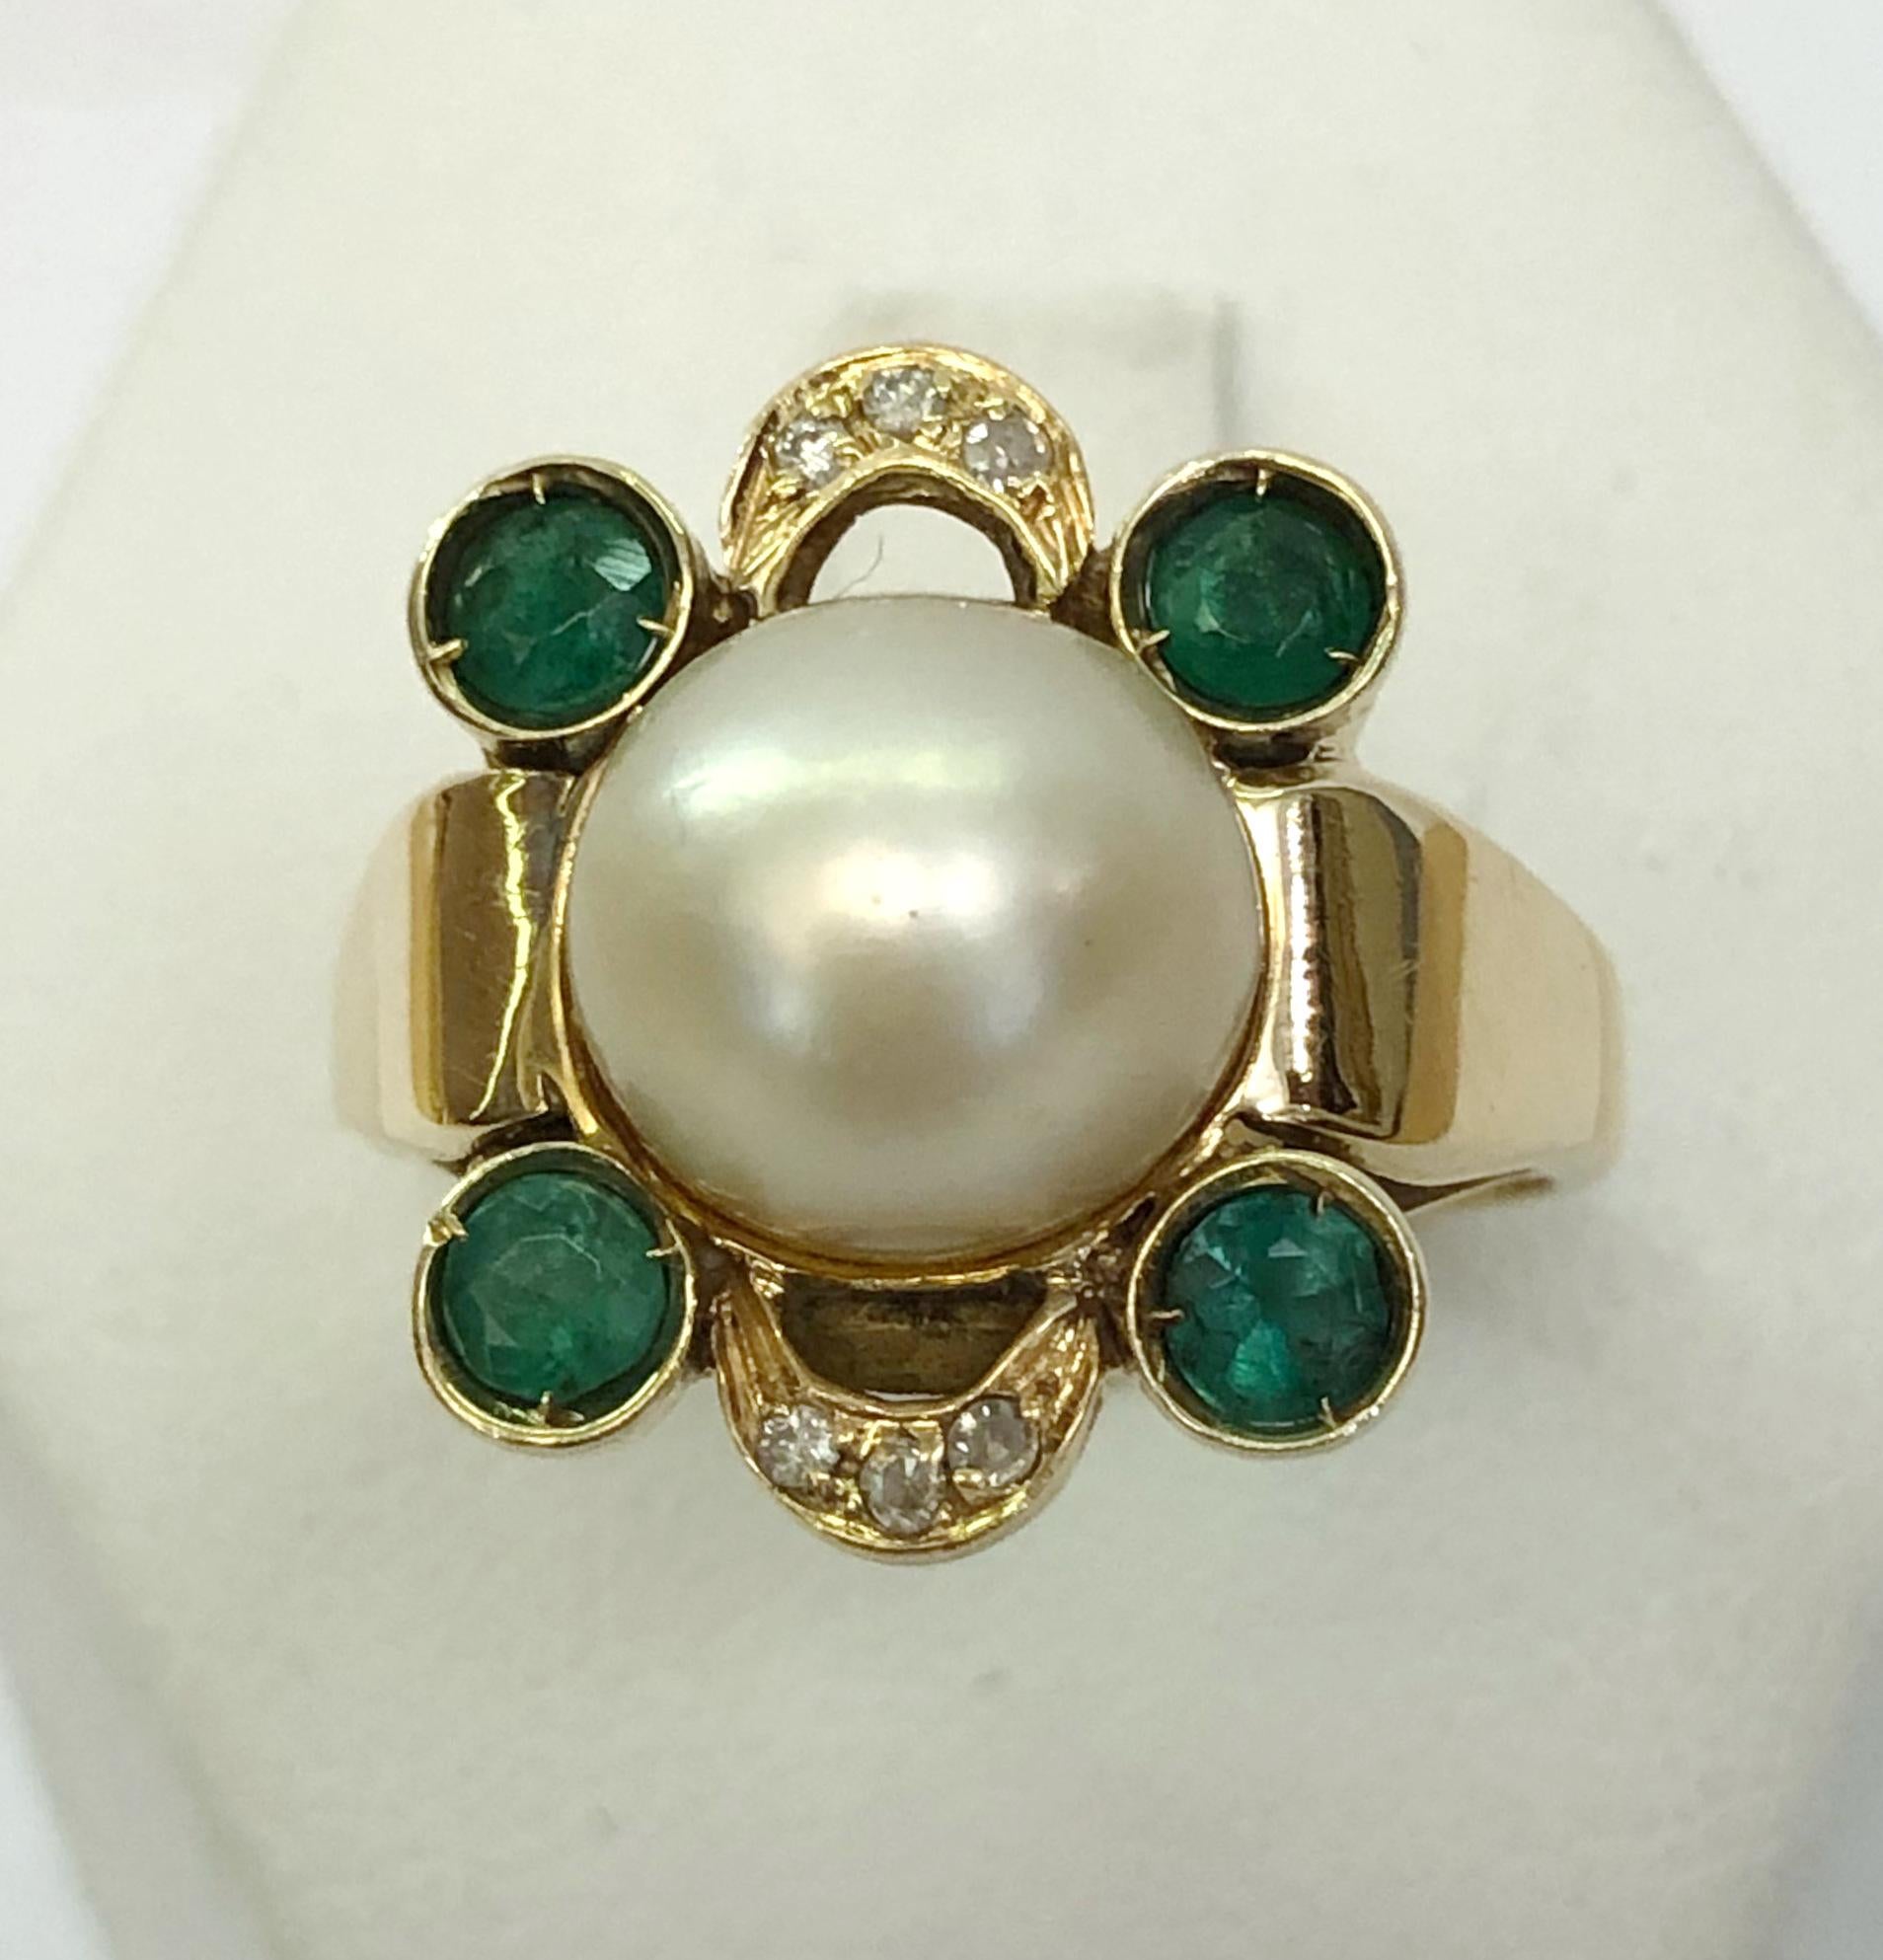 18 karat yellow gold ring with a central pearl, emeralds on the corners and small diamonds / Made in Italy 1960s
Ring size US 7